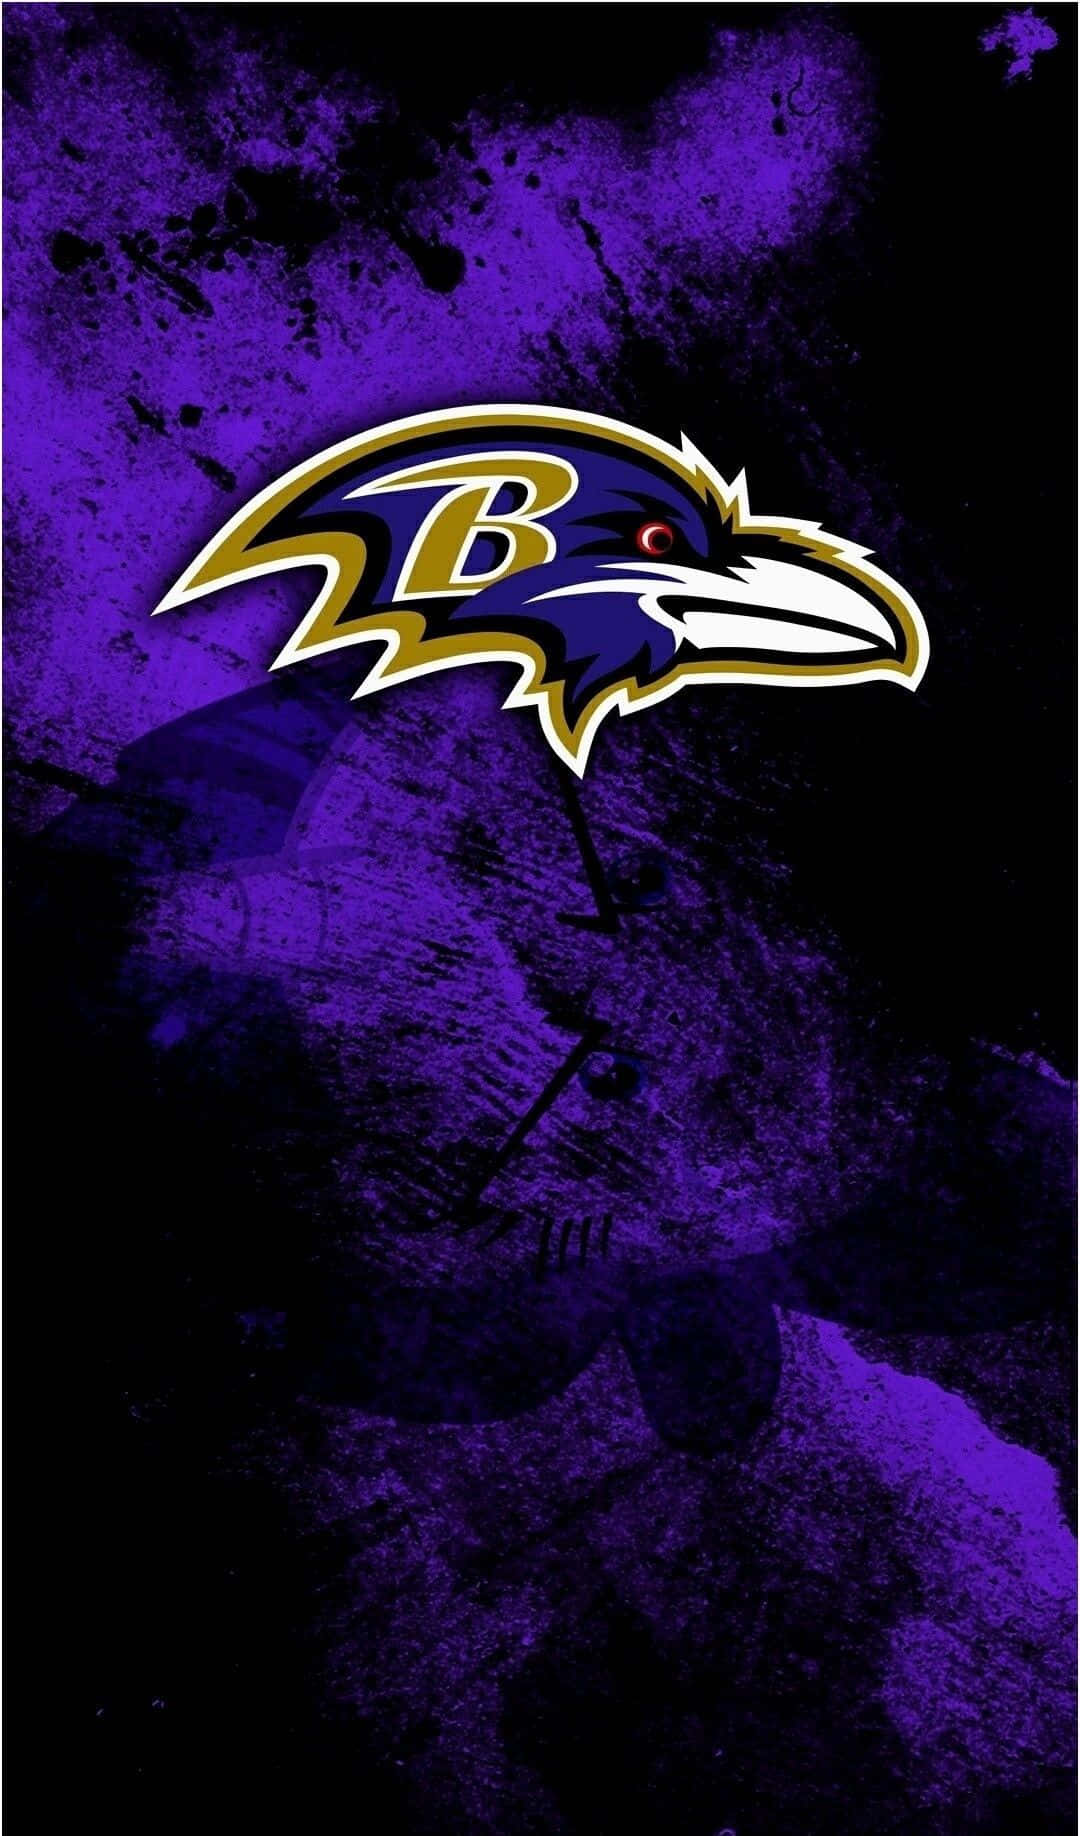 A tribute to Baltimore Ravens fans